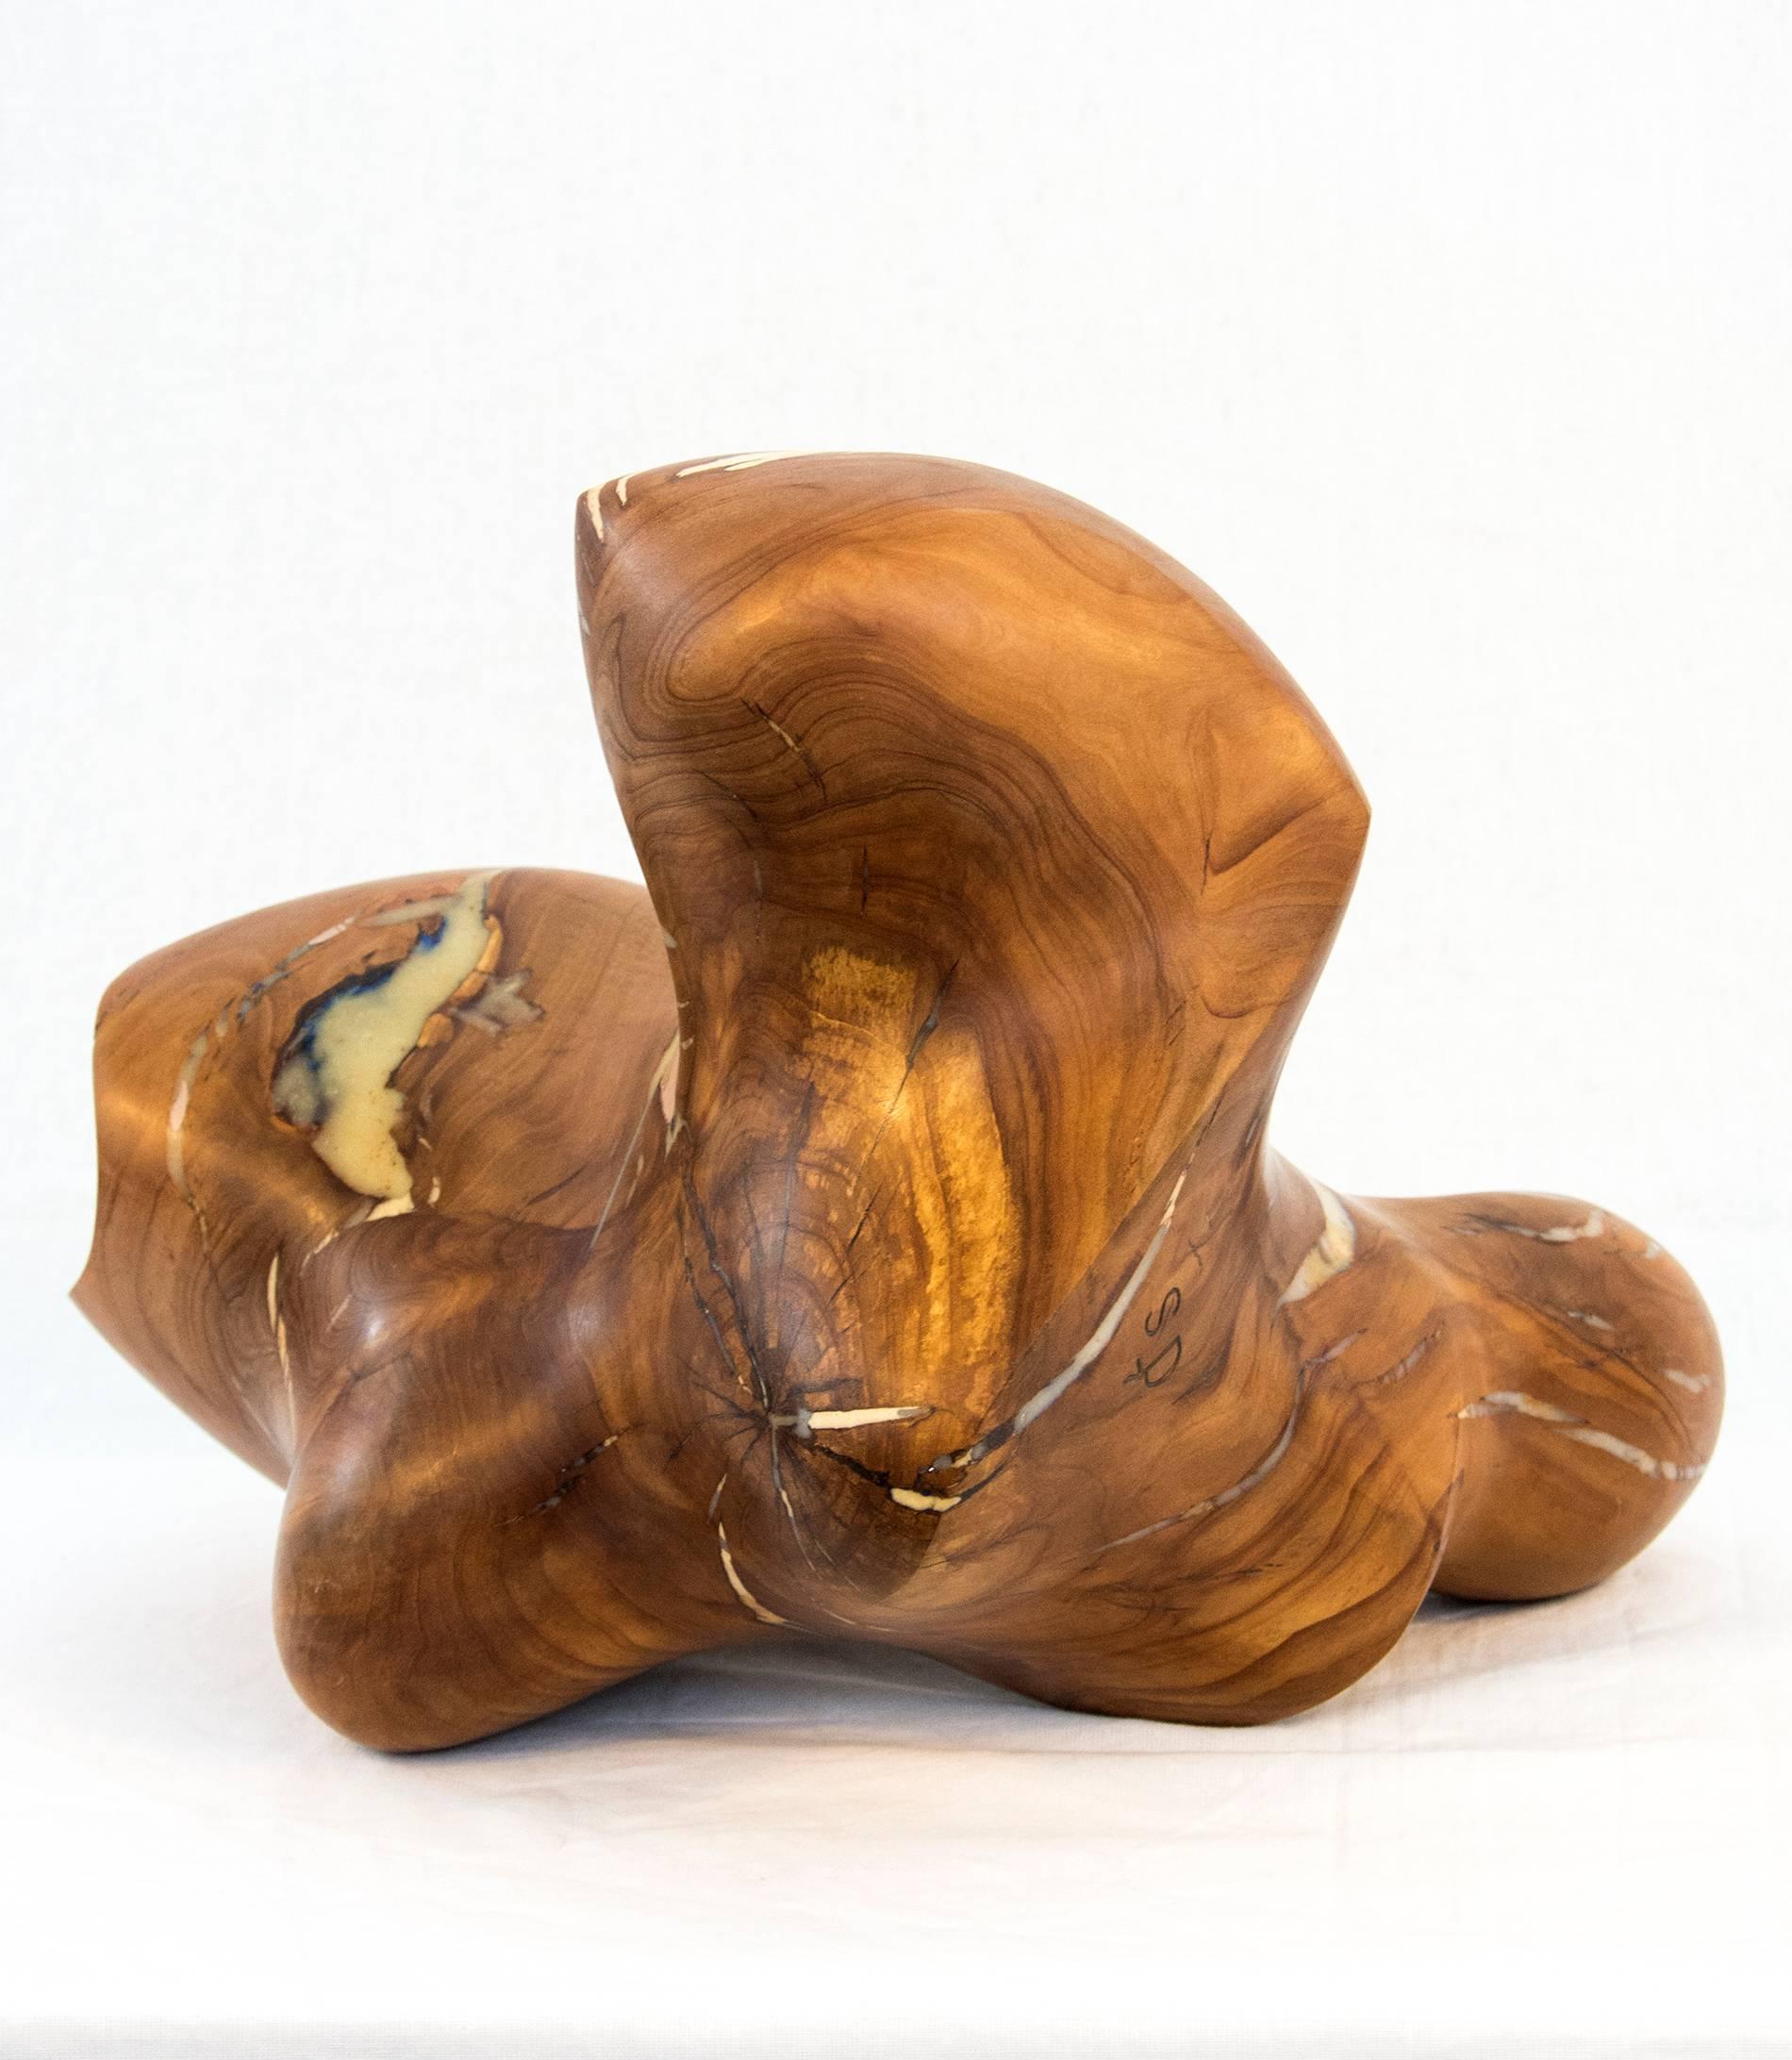 Windfall Series No 07 - smooth, polished, natural wood abstract carved sculpture - Brown Abstract Sculpture by Shayne Dark